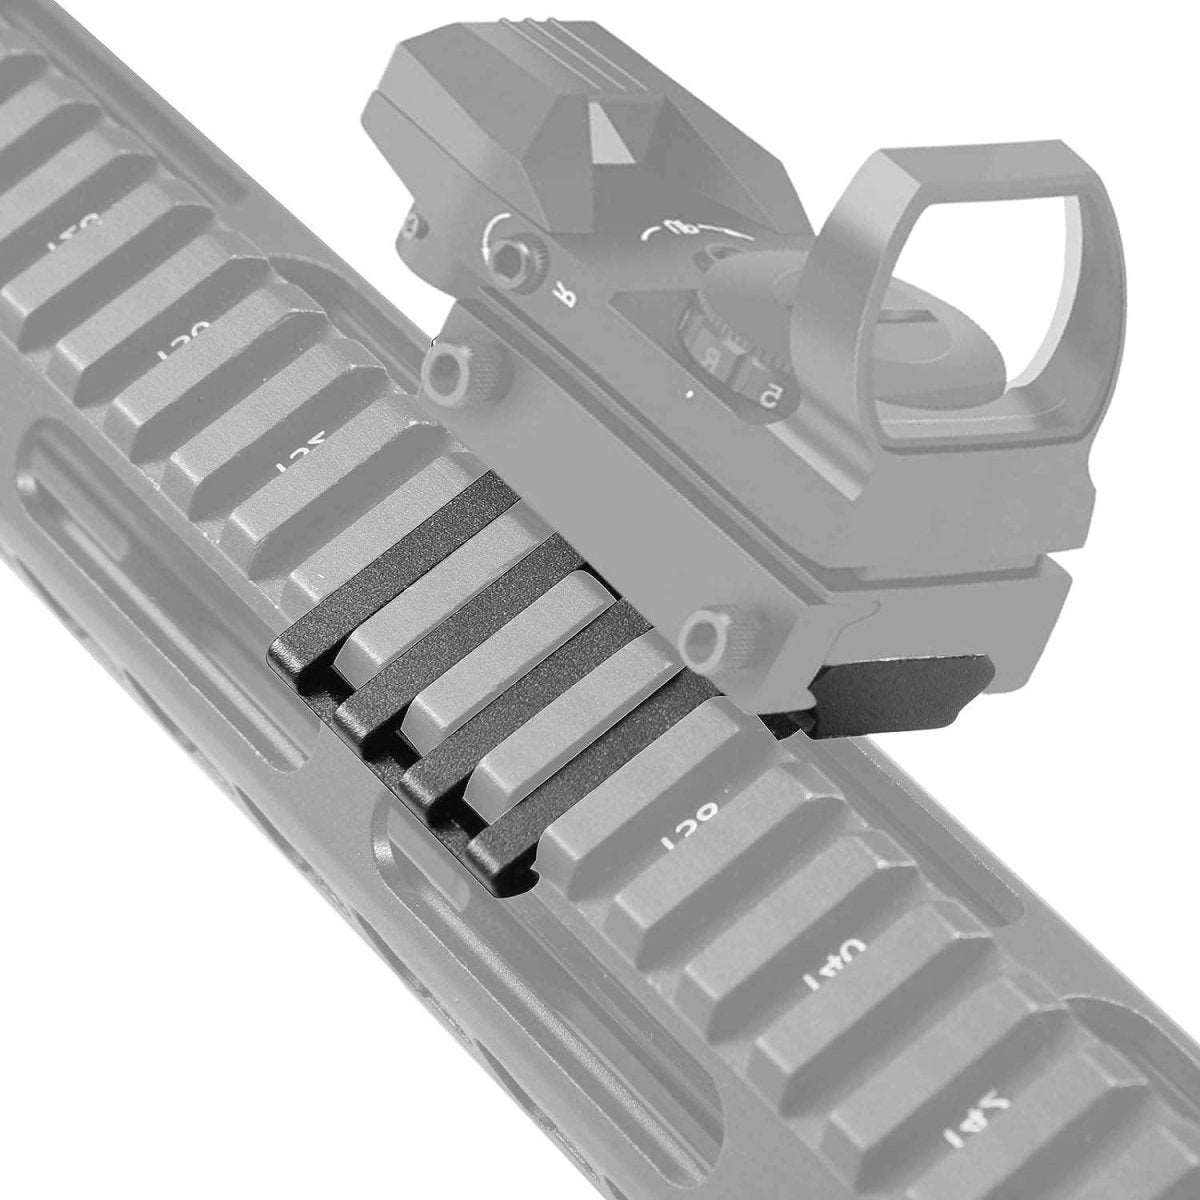 45 Degree Offset Picatinny Rail Mount - Tactical Low Profile Adapter - AirGun Tactical